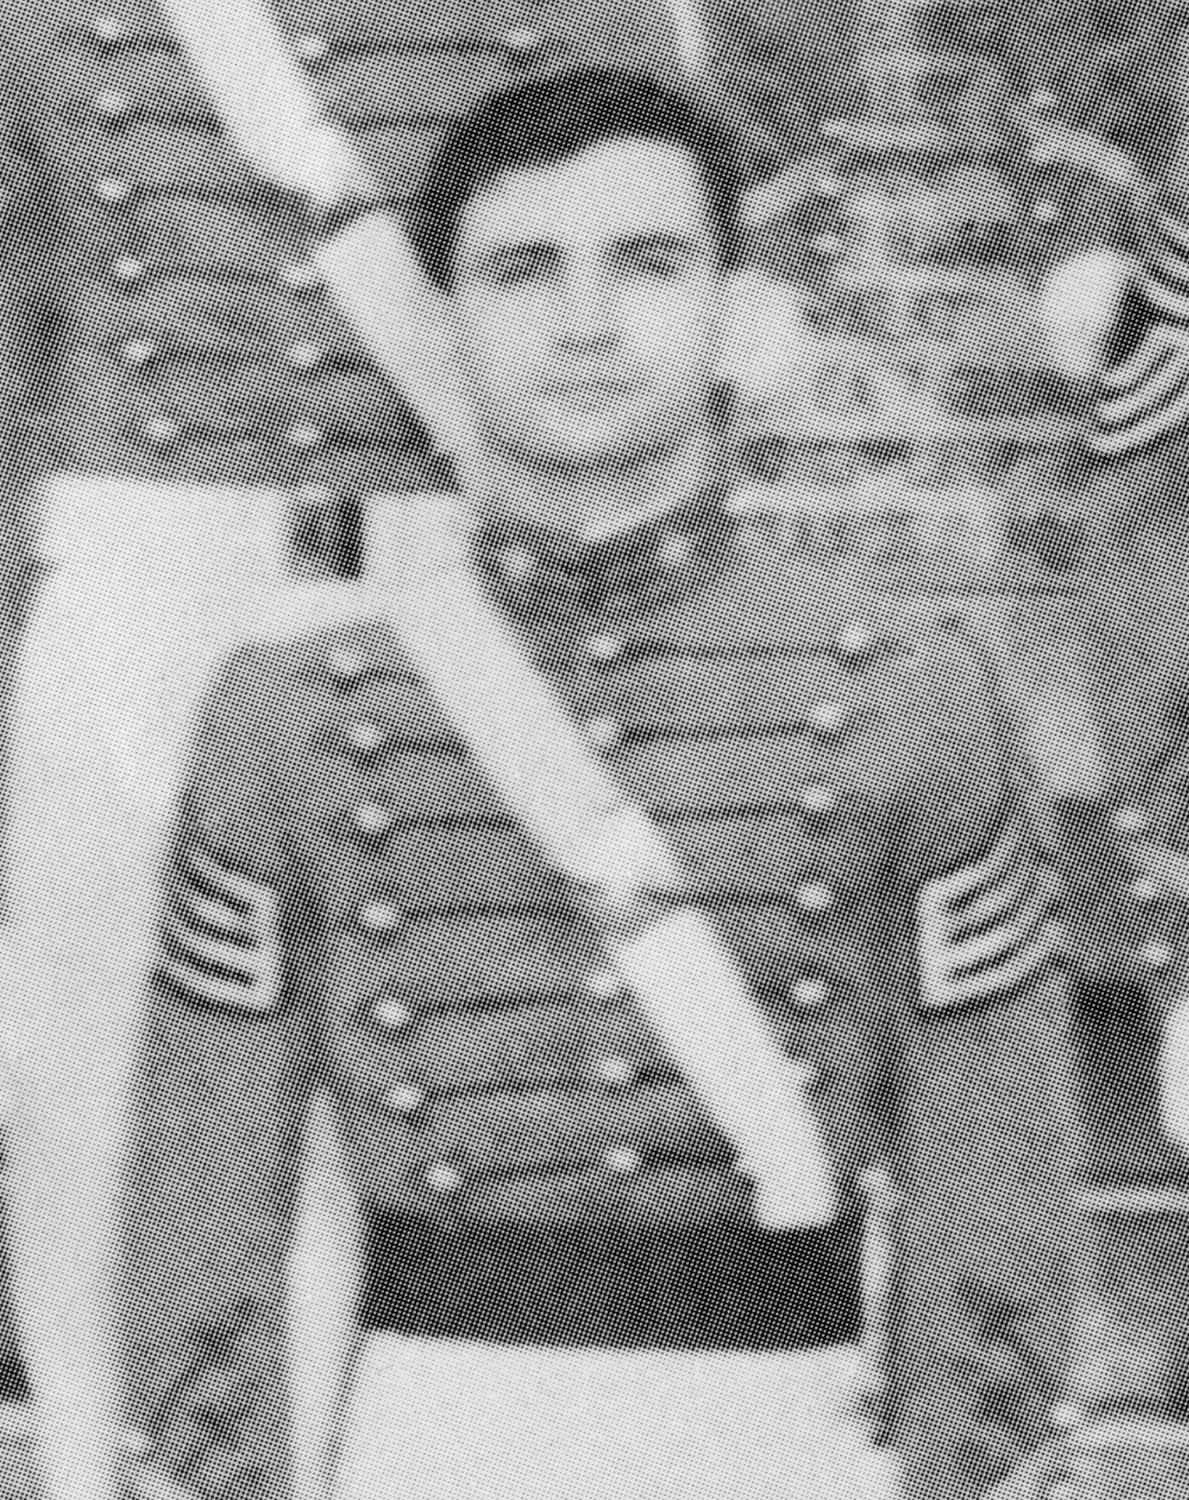 Photo of young Jack Reed in Military uniform